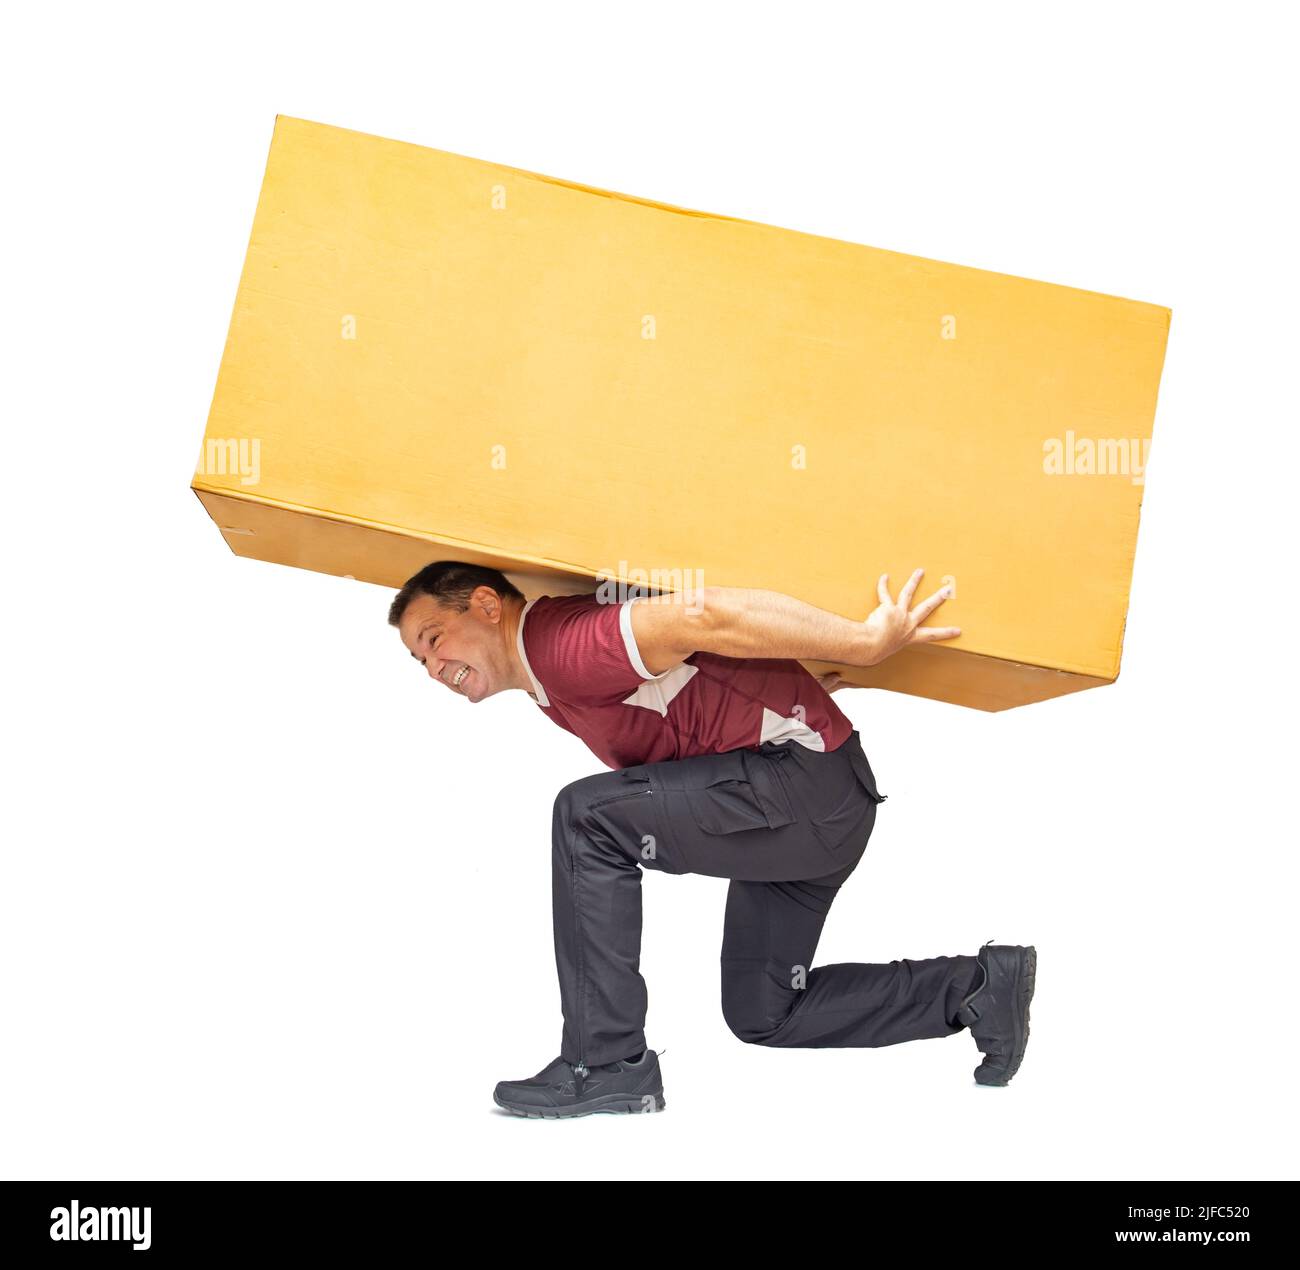 The courier falls under the weight of a large package, isolated on a white background. Stock Photo